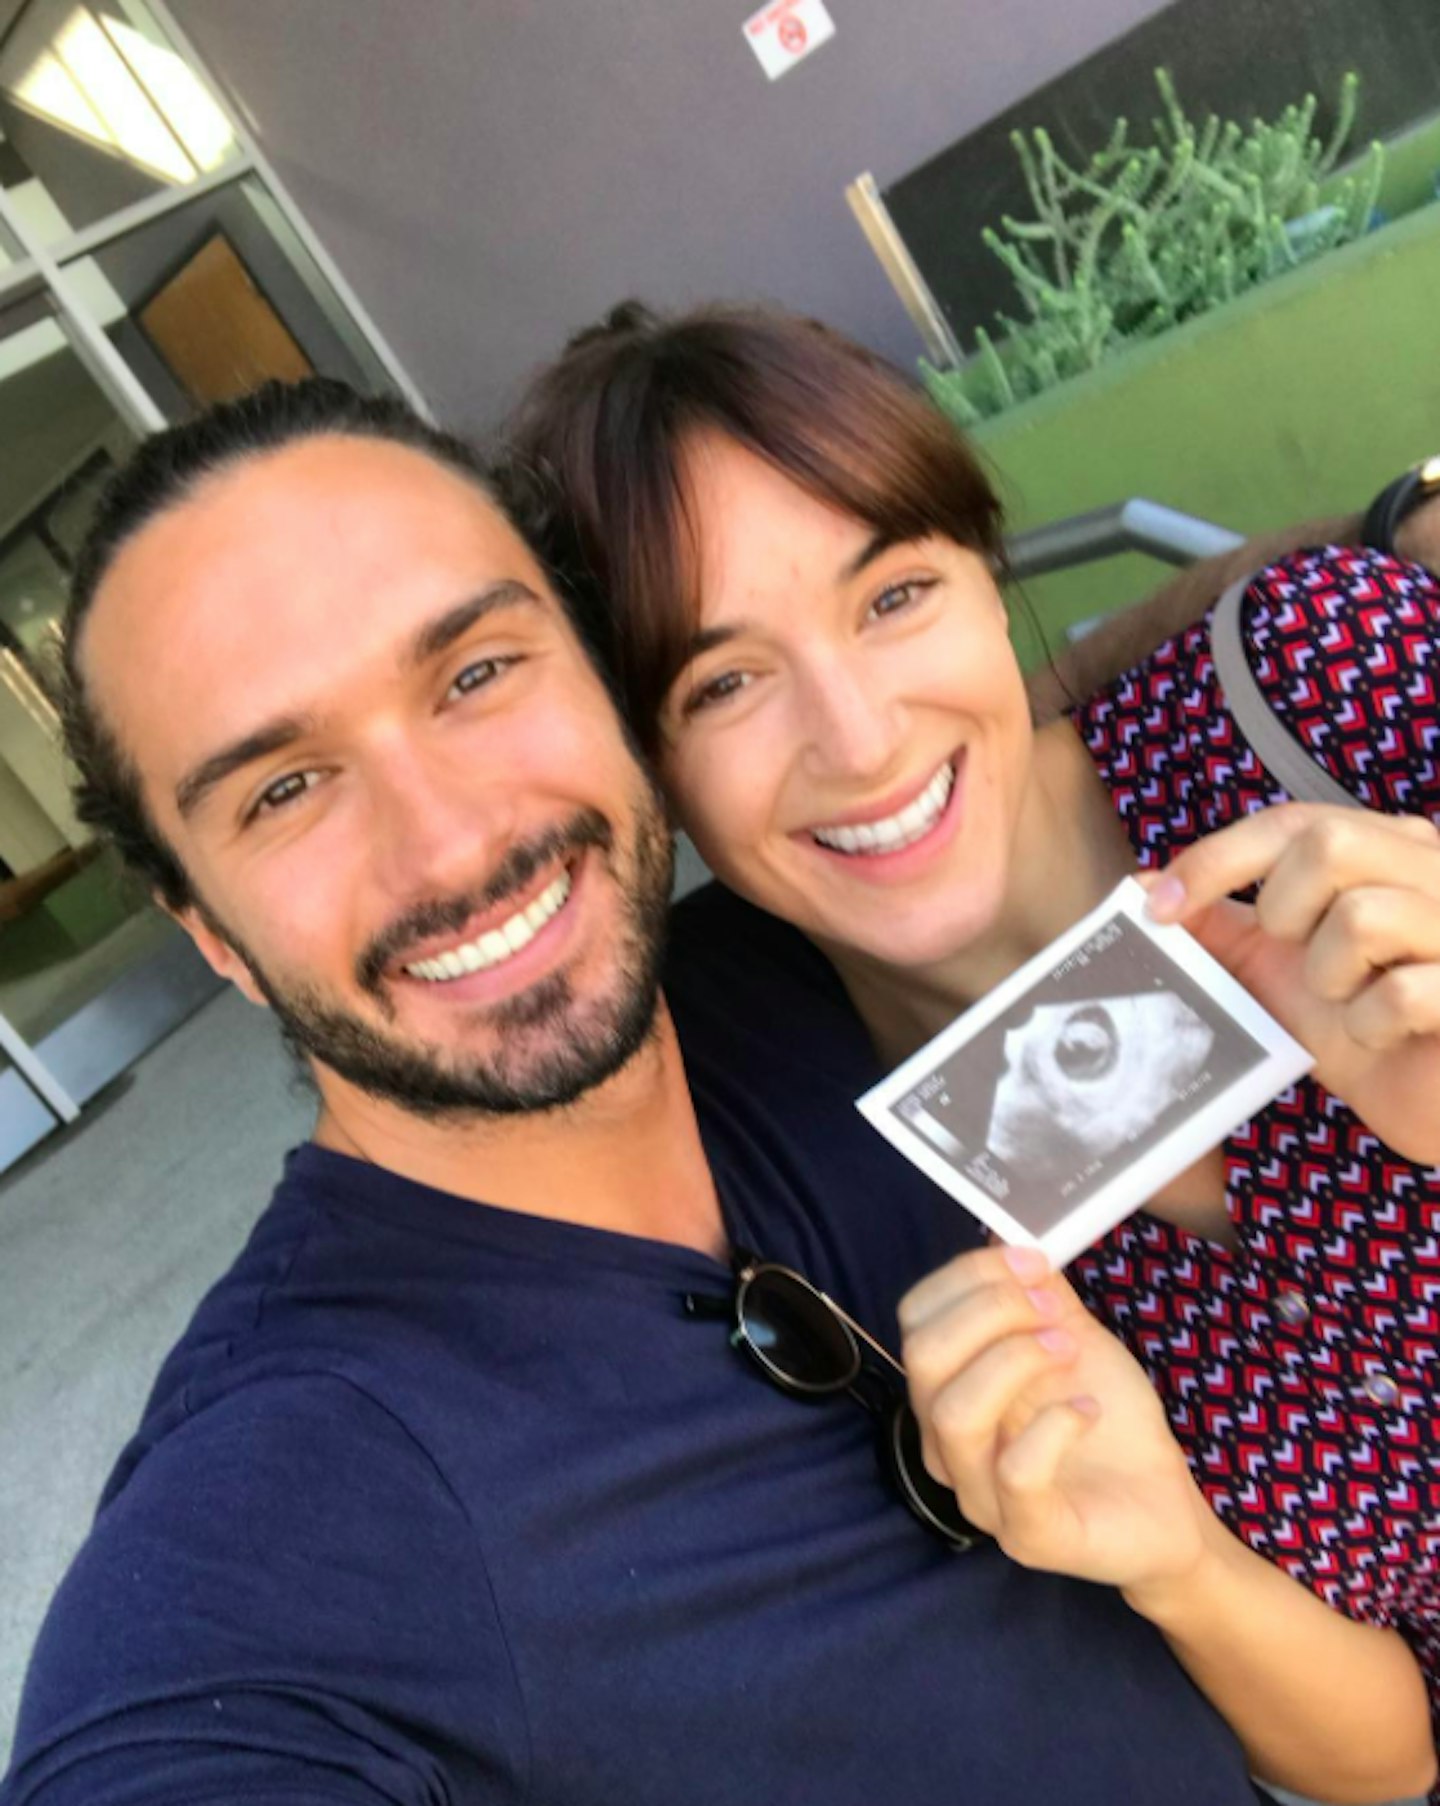 Joe Wicks expecting his first child